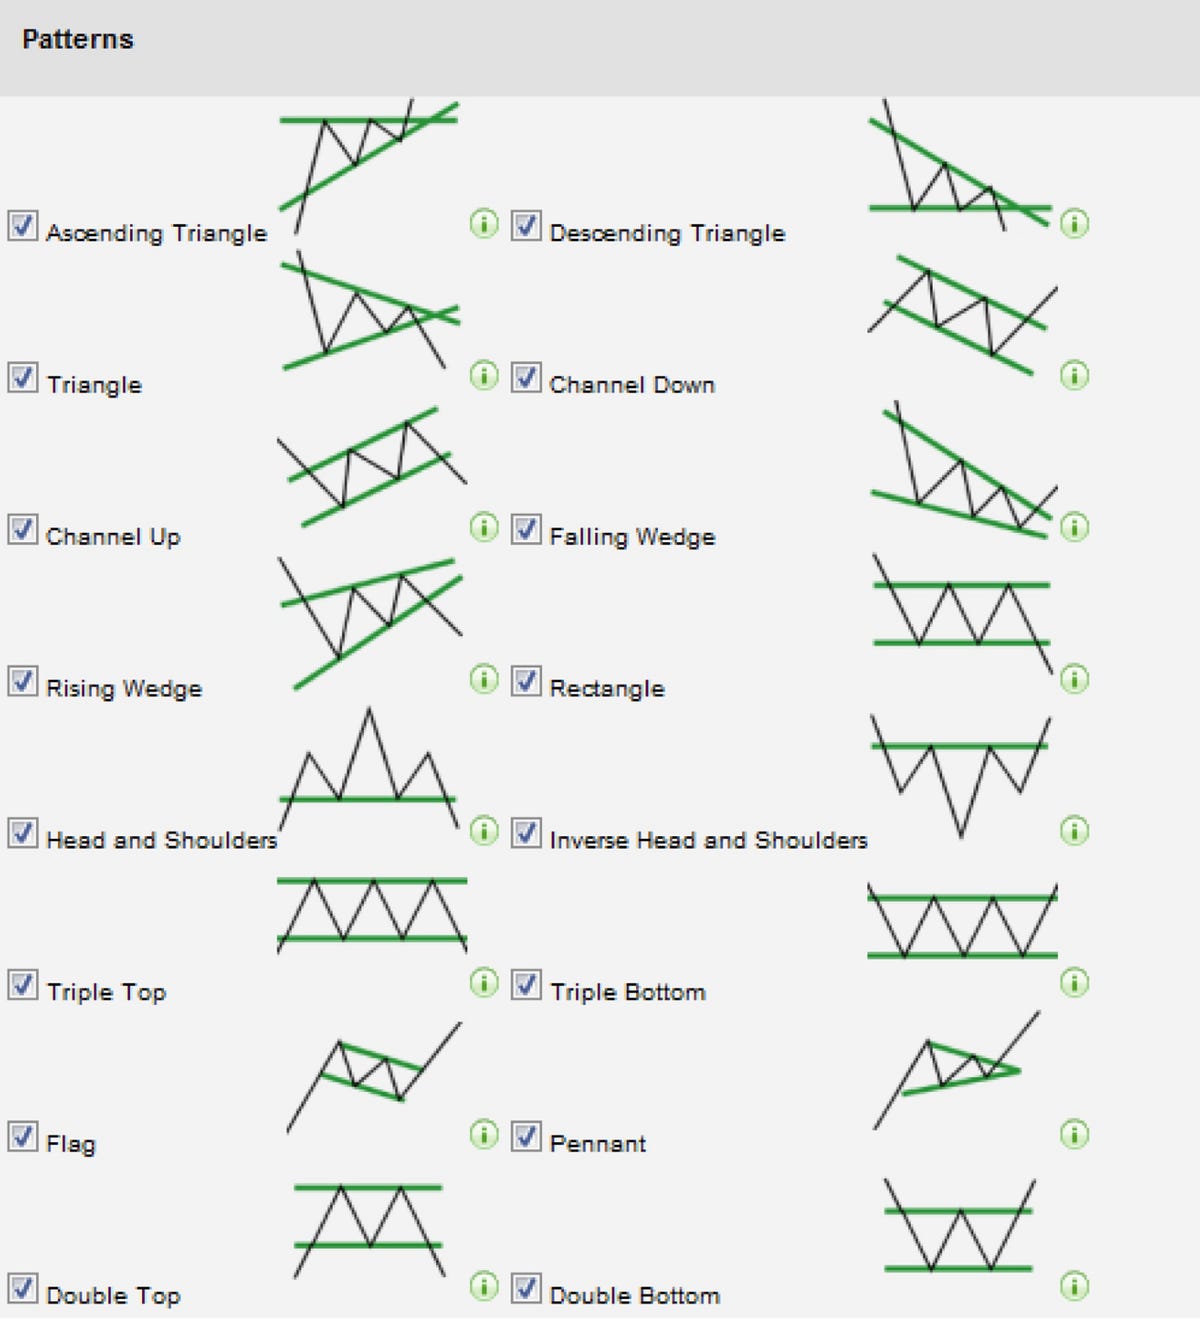 Different stock chart patterns